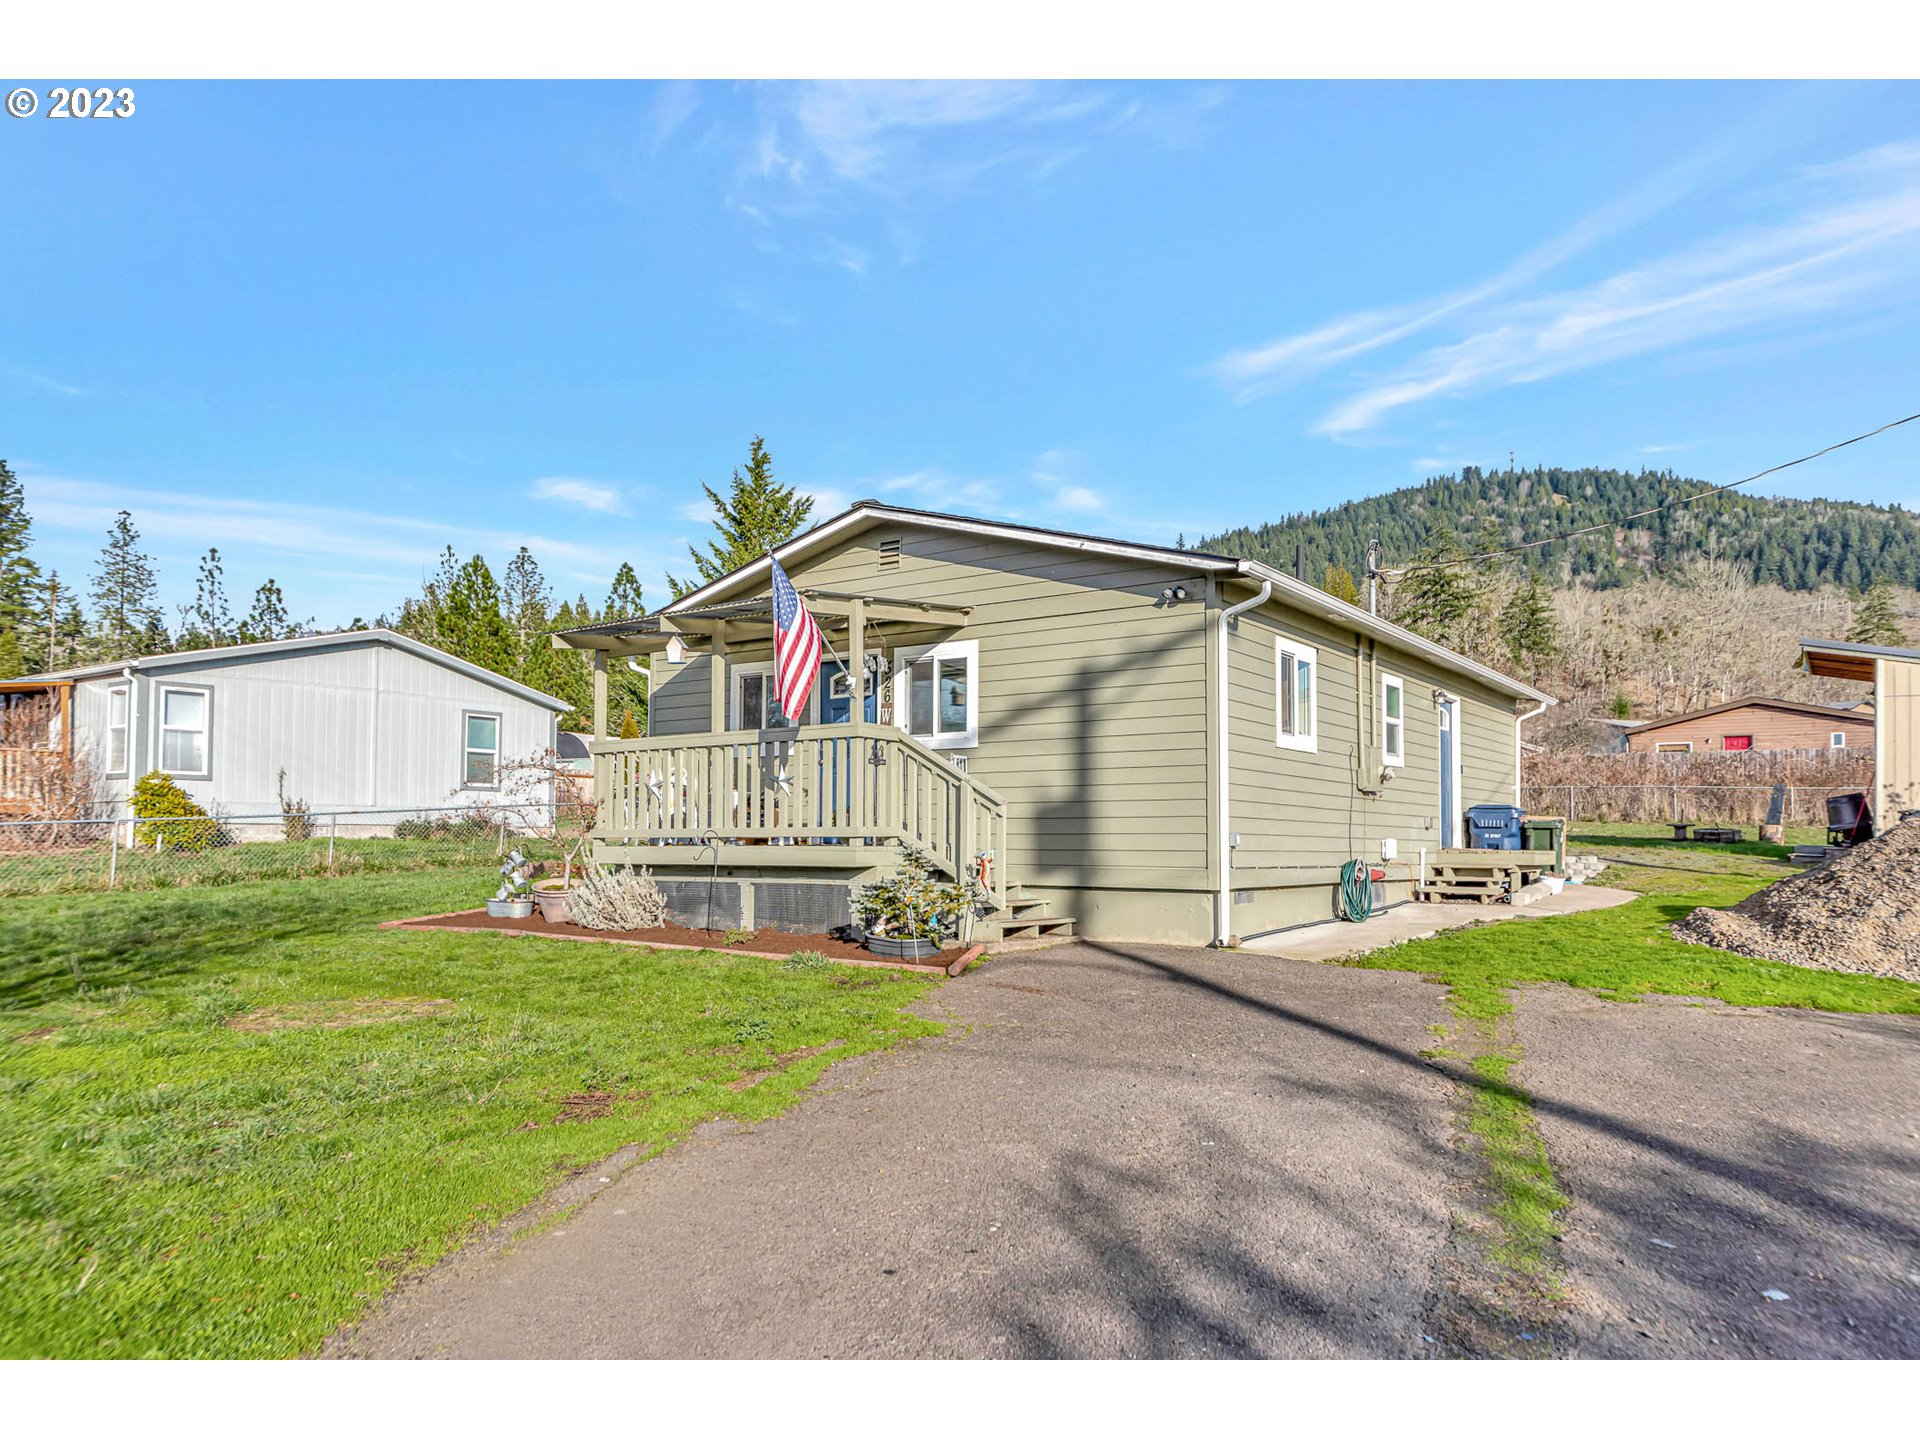 526 D ST, Lowell, OR 97452